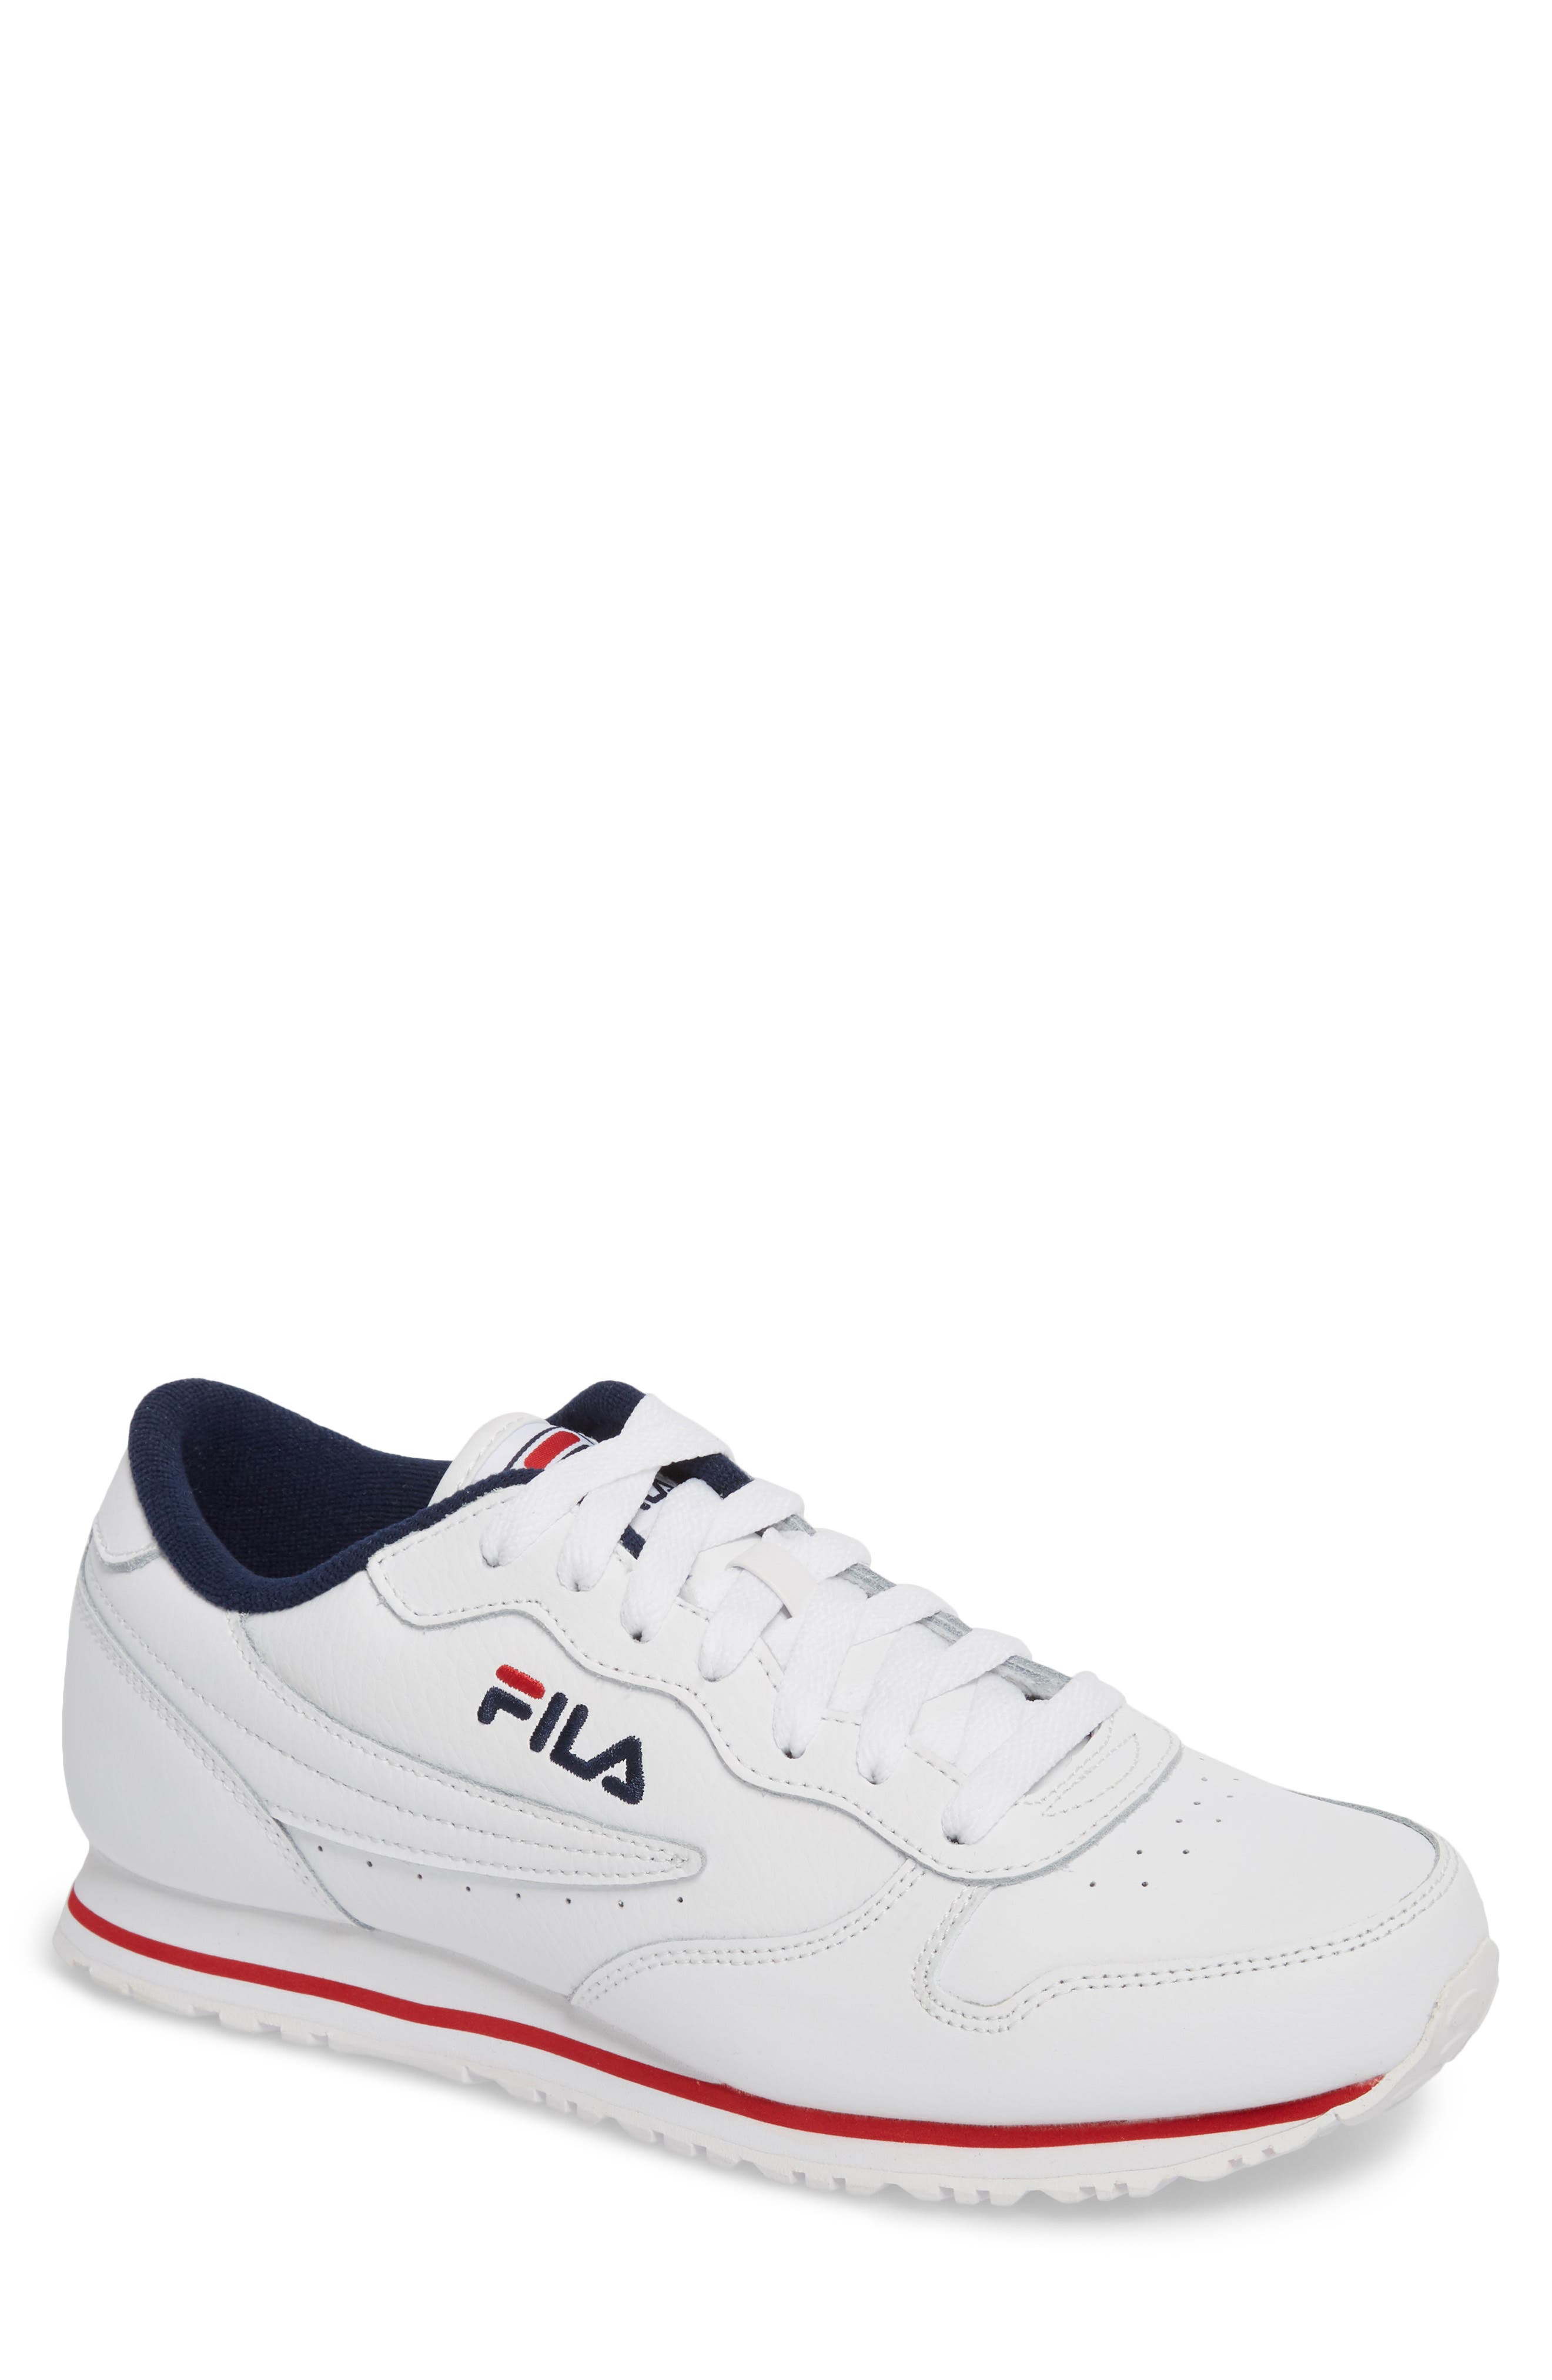 fila shoes pink and gold